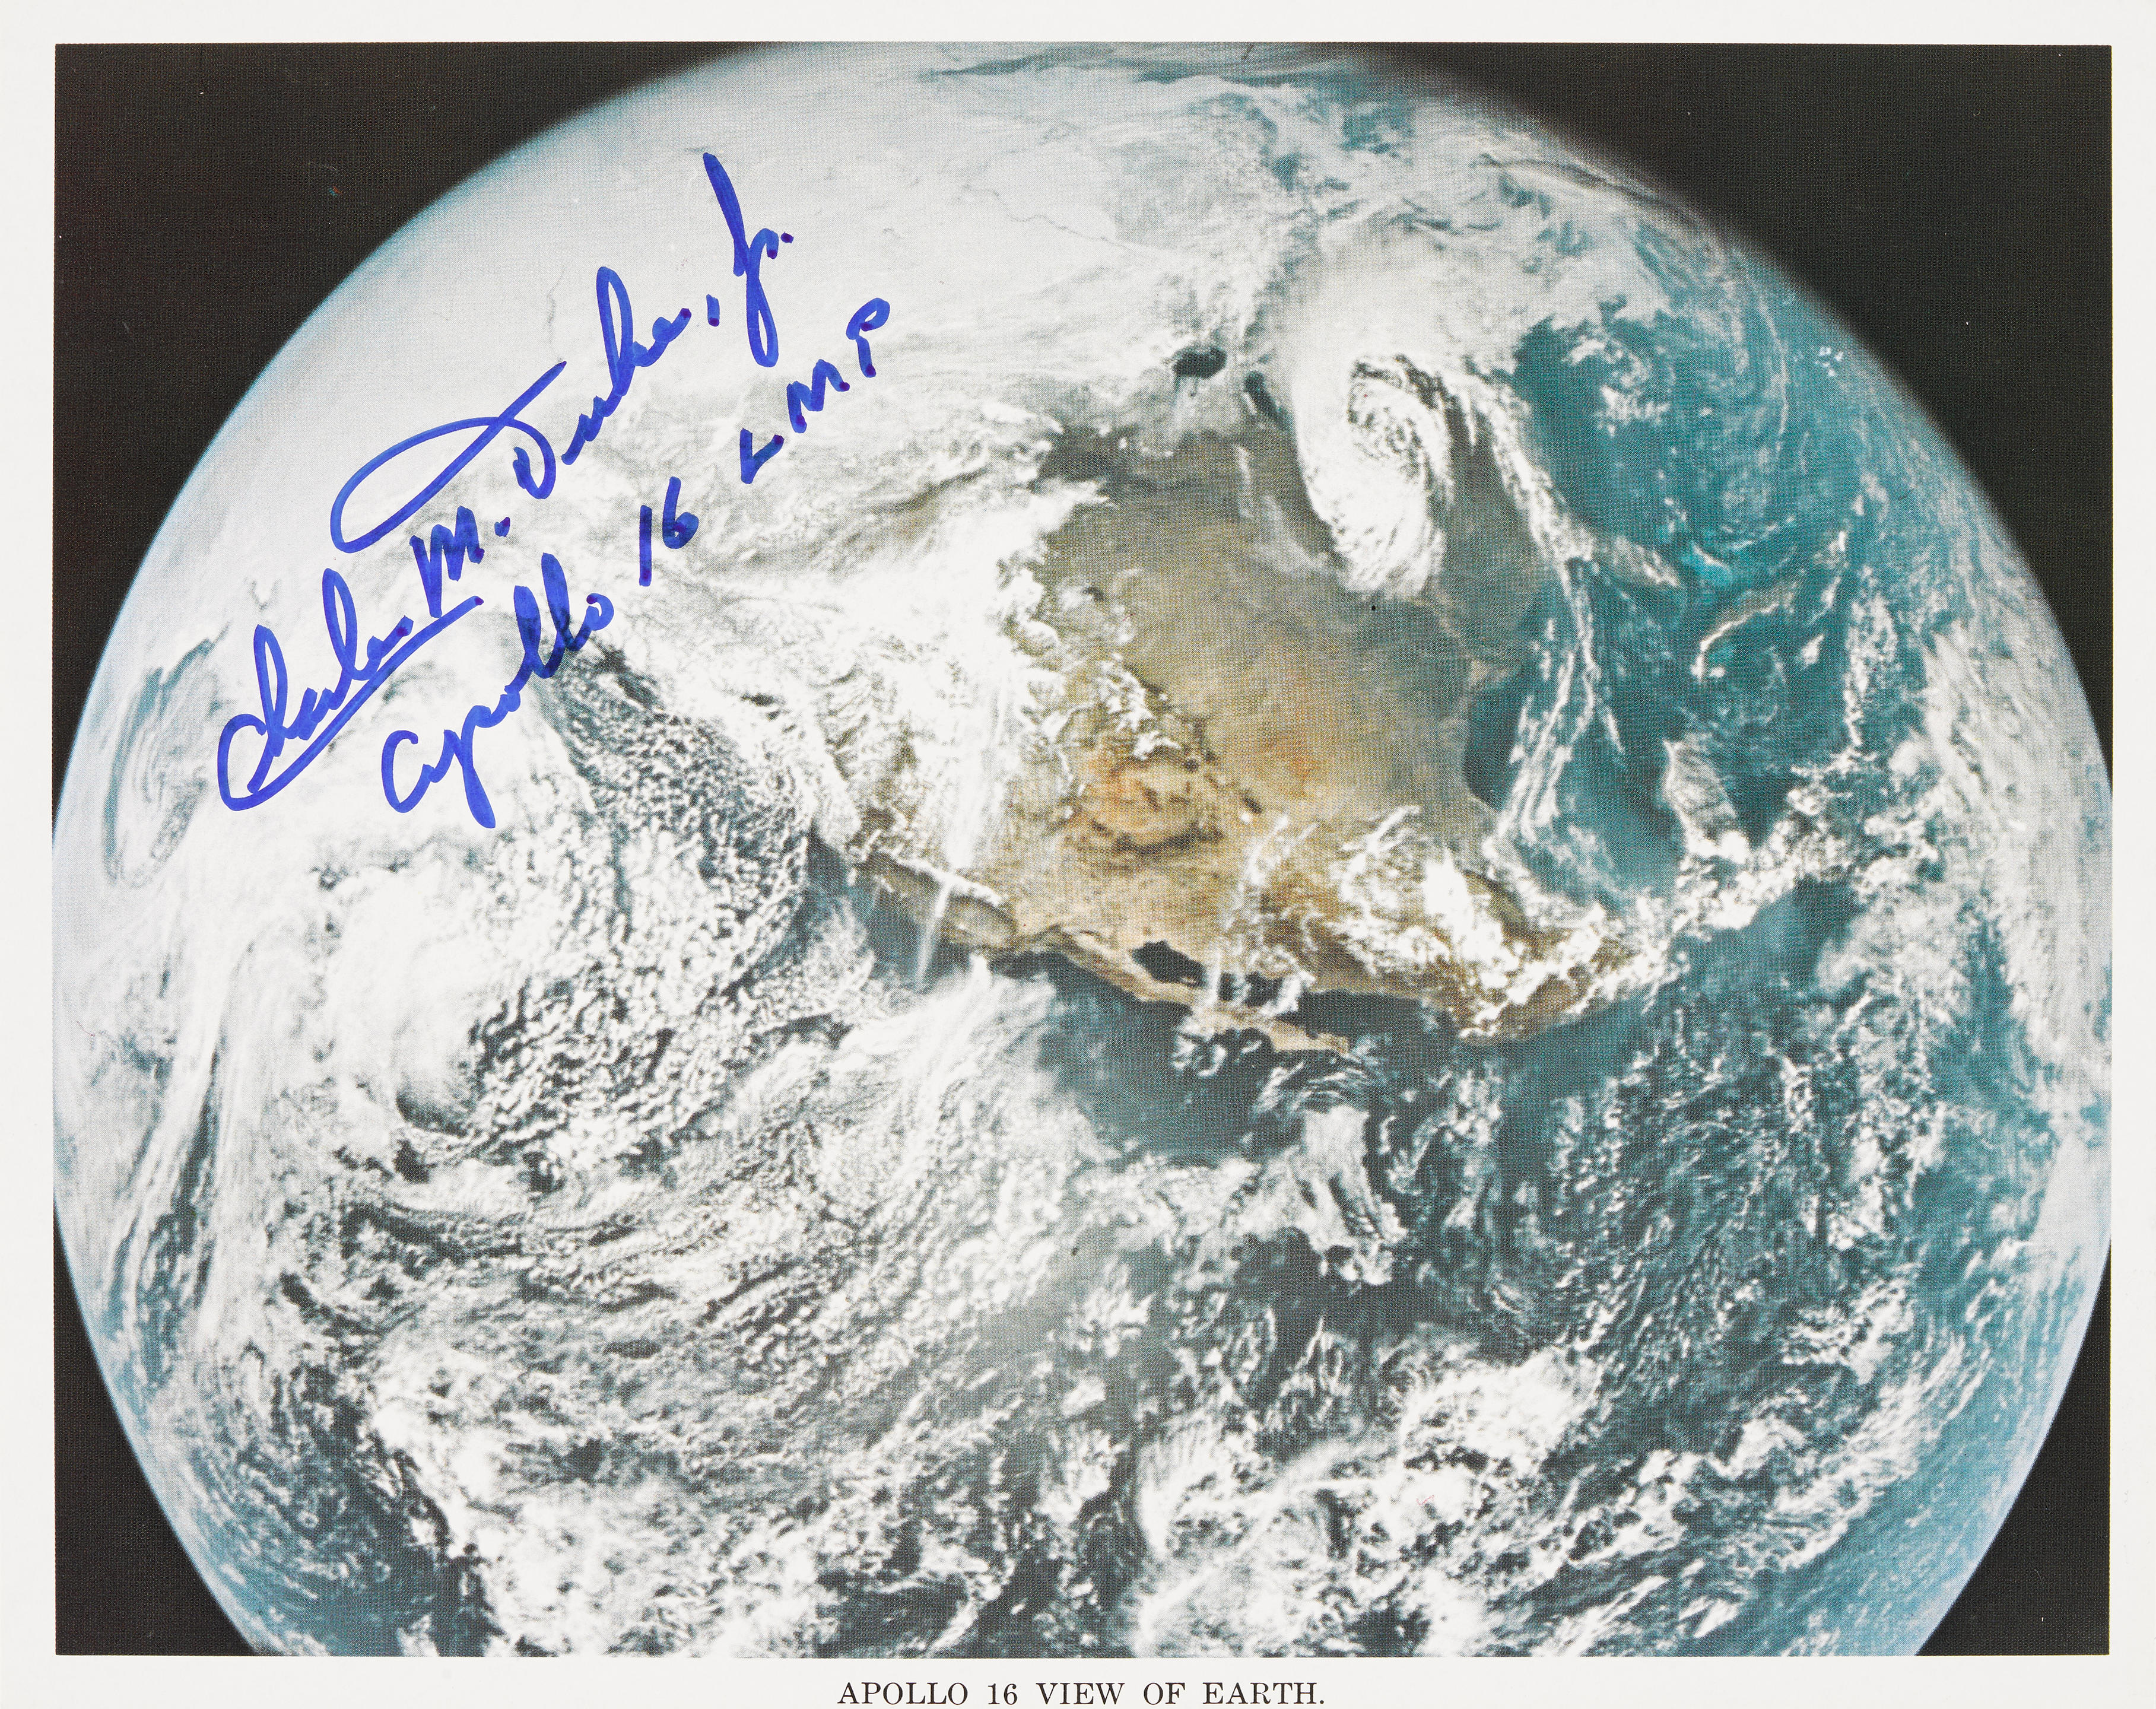 APOLLO 16 LEAVES EARTH ORBIT FOR THE MOON SIGNED